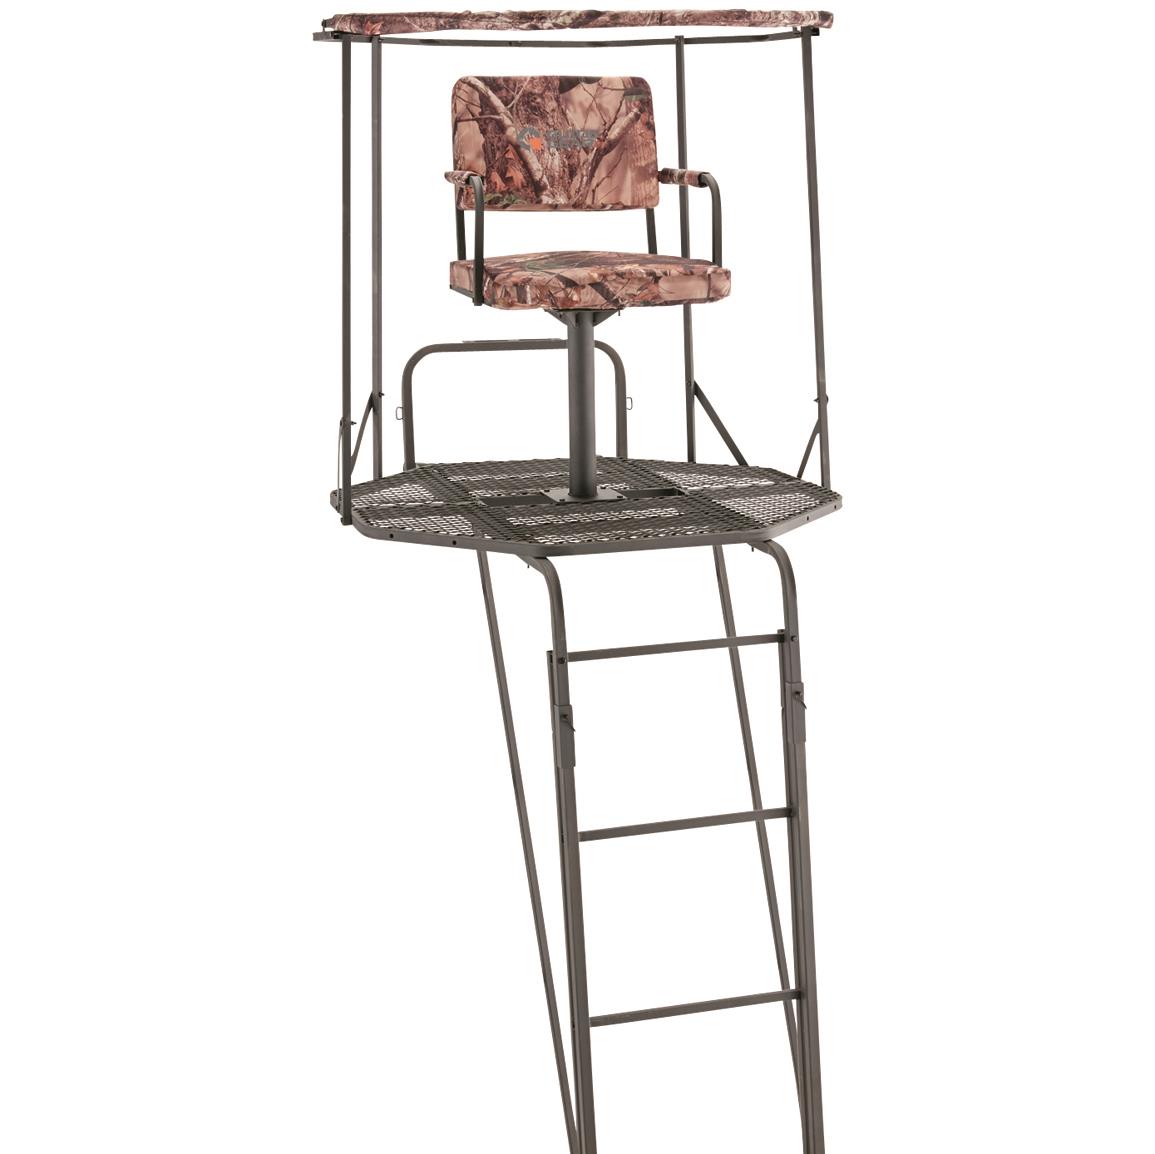 Details about   Ladder Tree Stand Padded Wrap Around Shooting Rail Foot Platform Swivel Type Set 